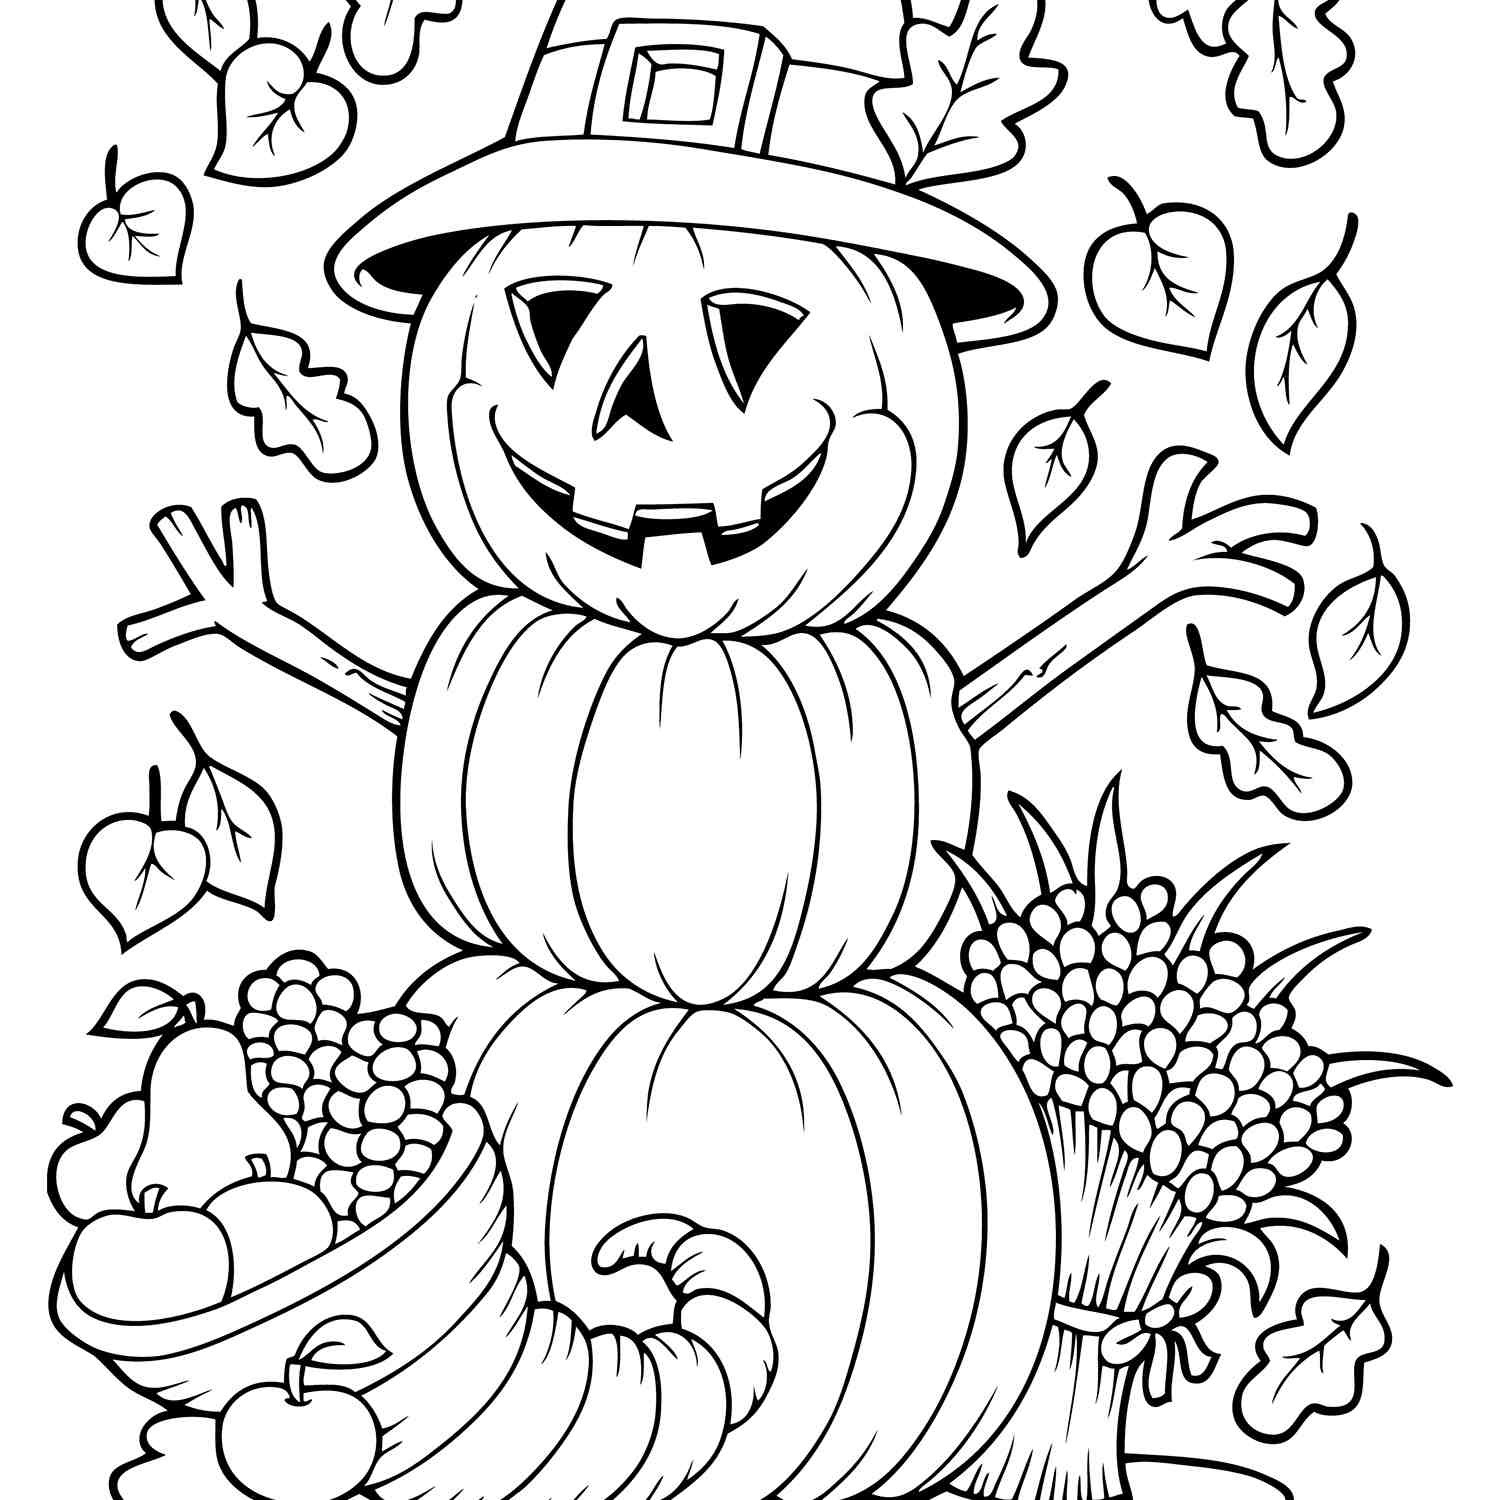 Coloring Pages For Kids Fall
 19 Places to Find Free Autumn and Fall Coloring Pages